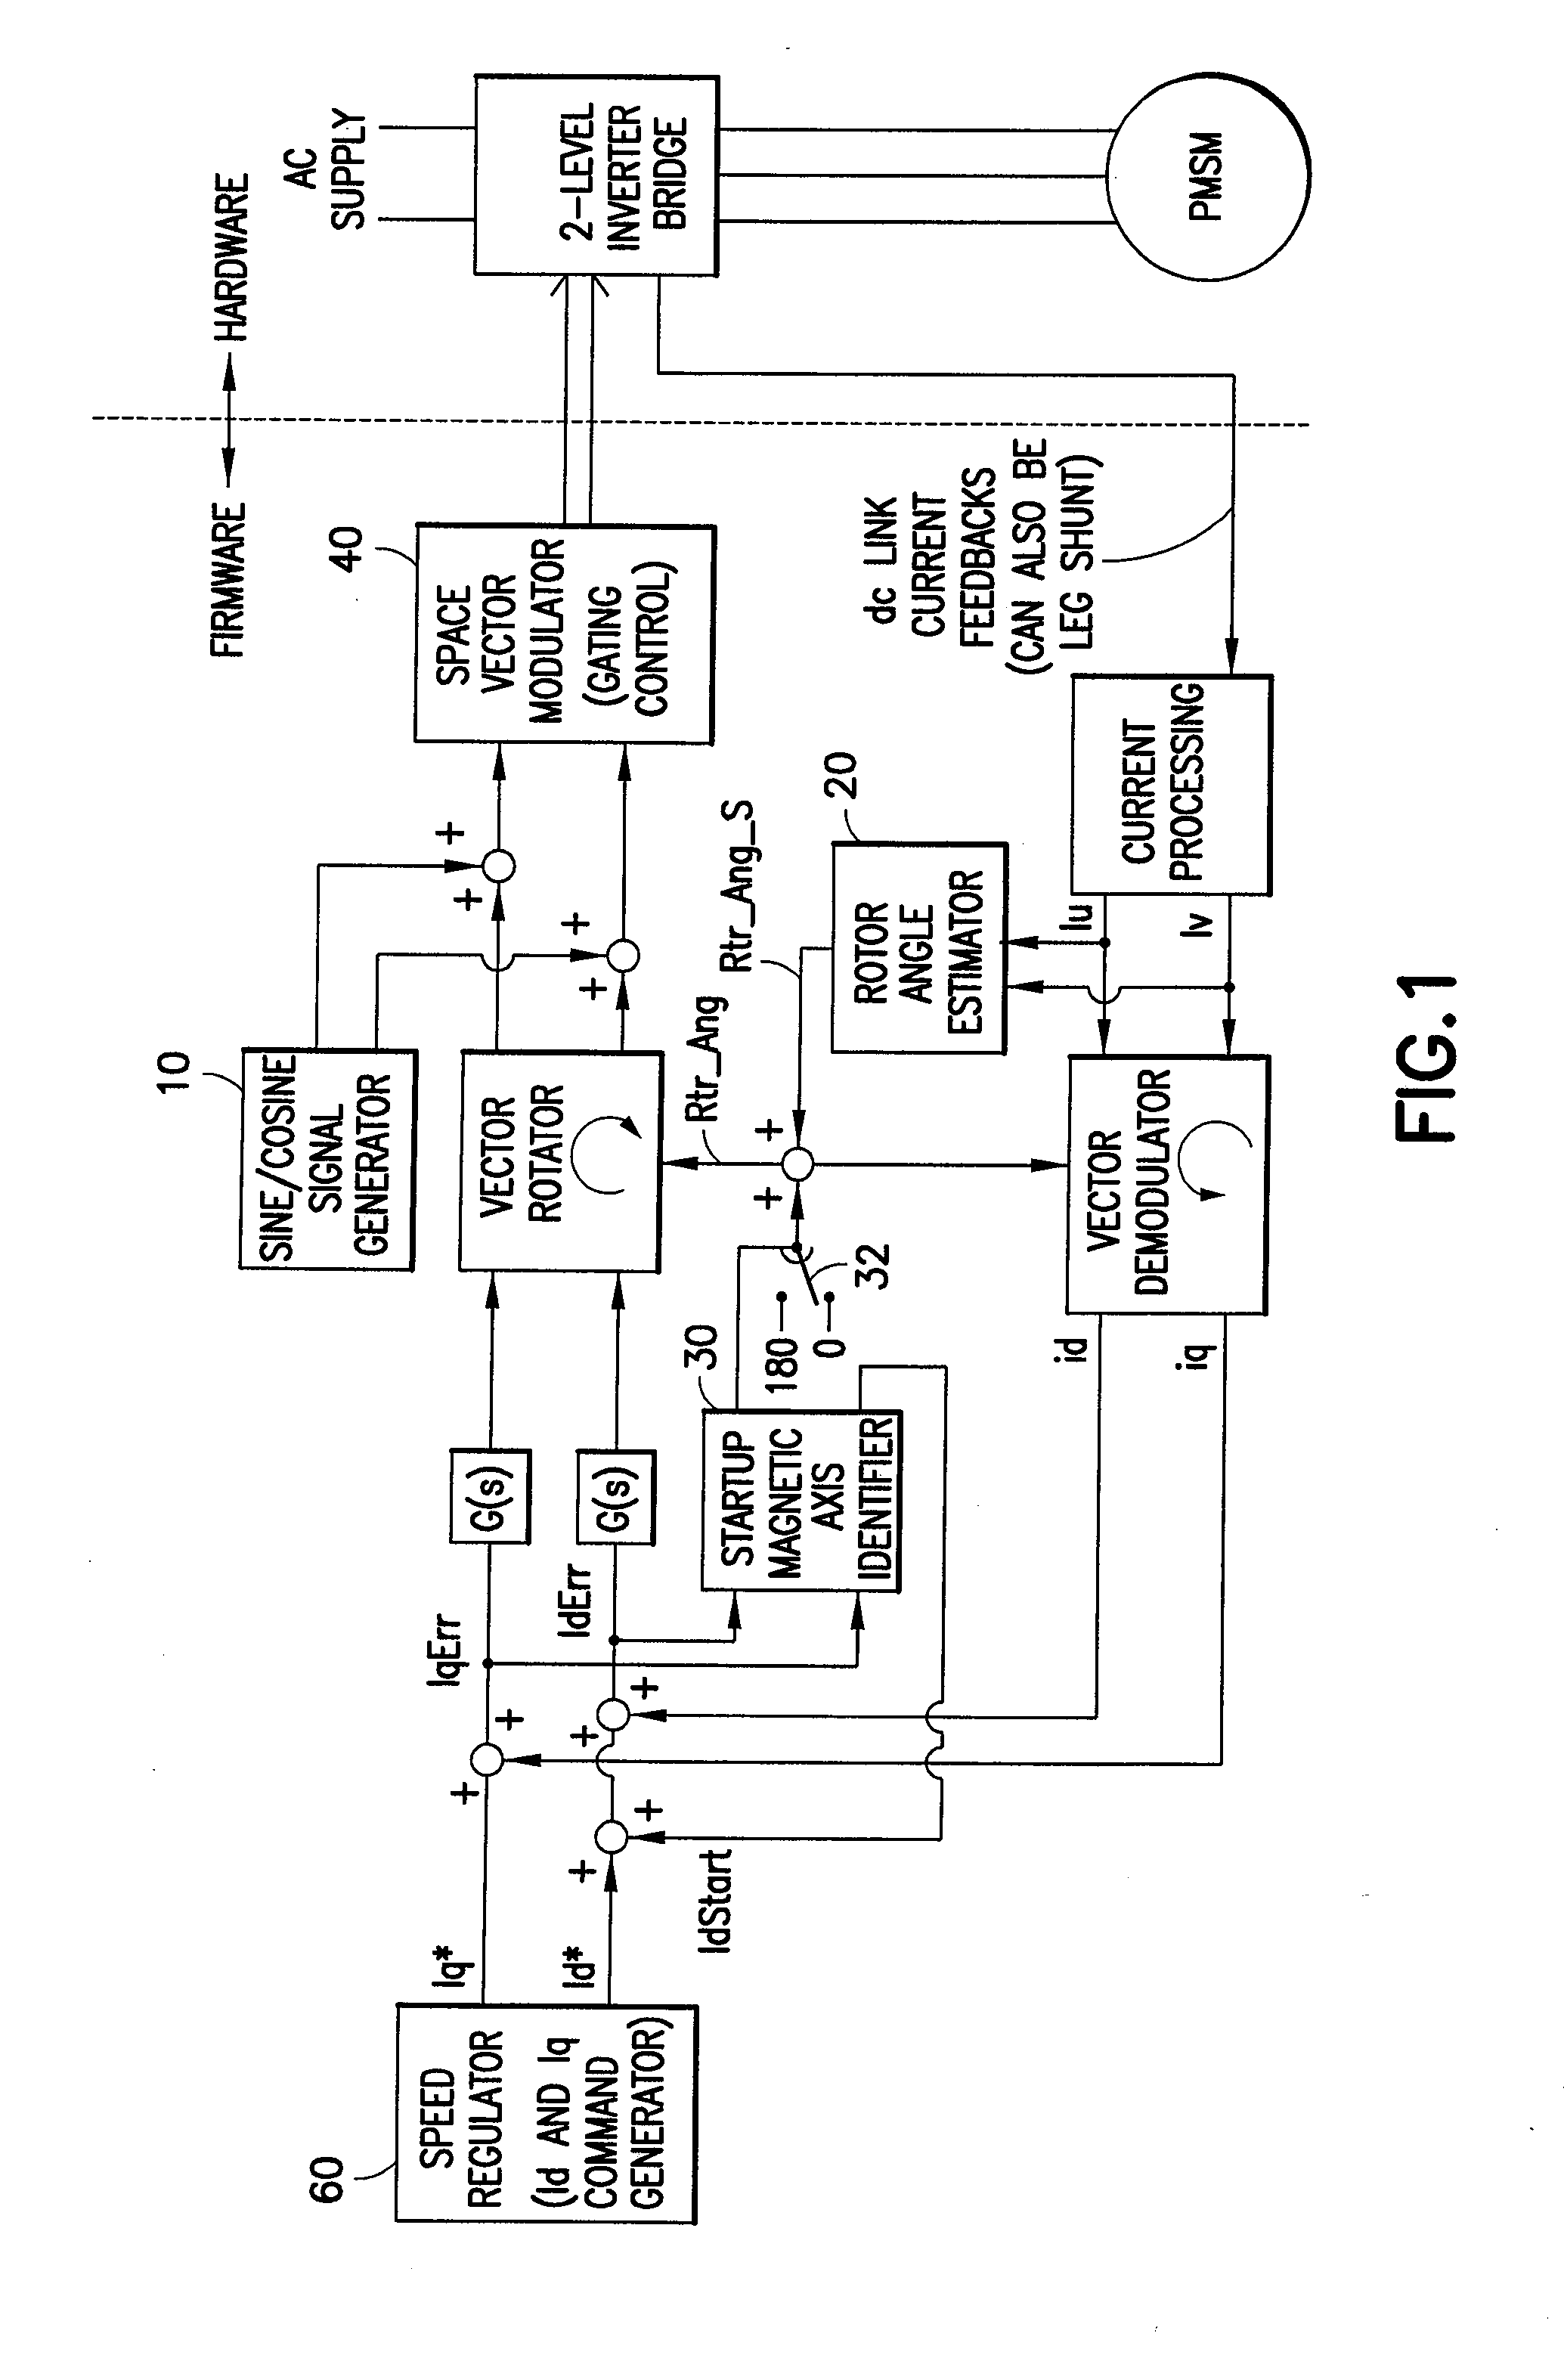 Signal conditioning apparatus and method for determination of permanent magnet motor rotor position